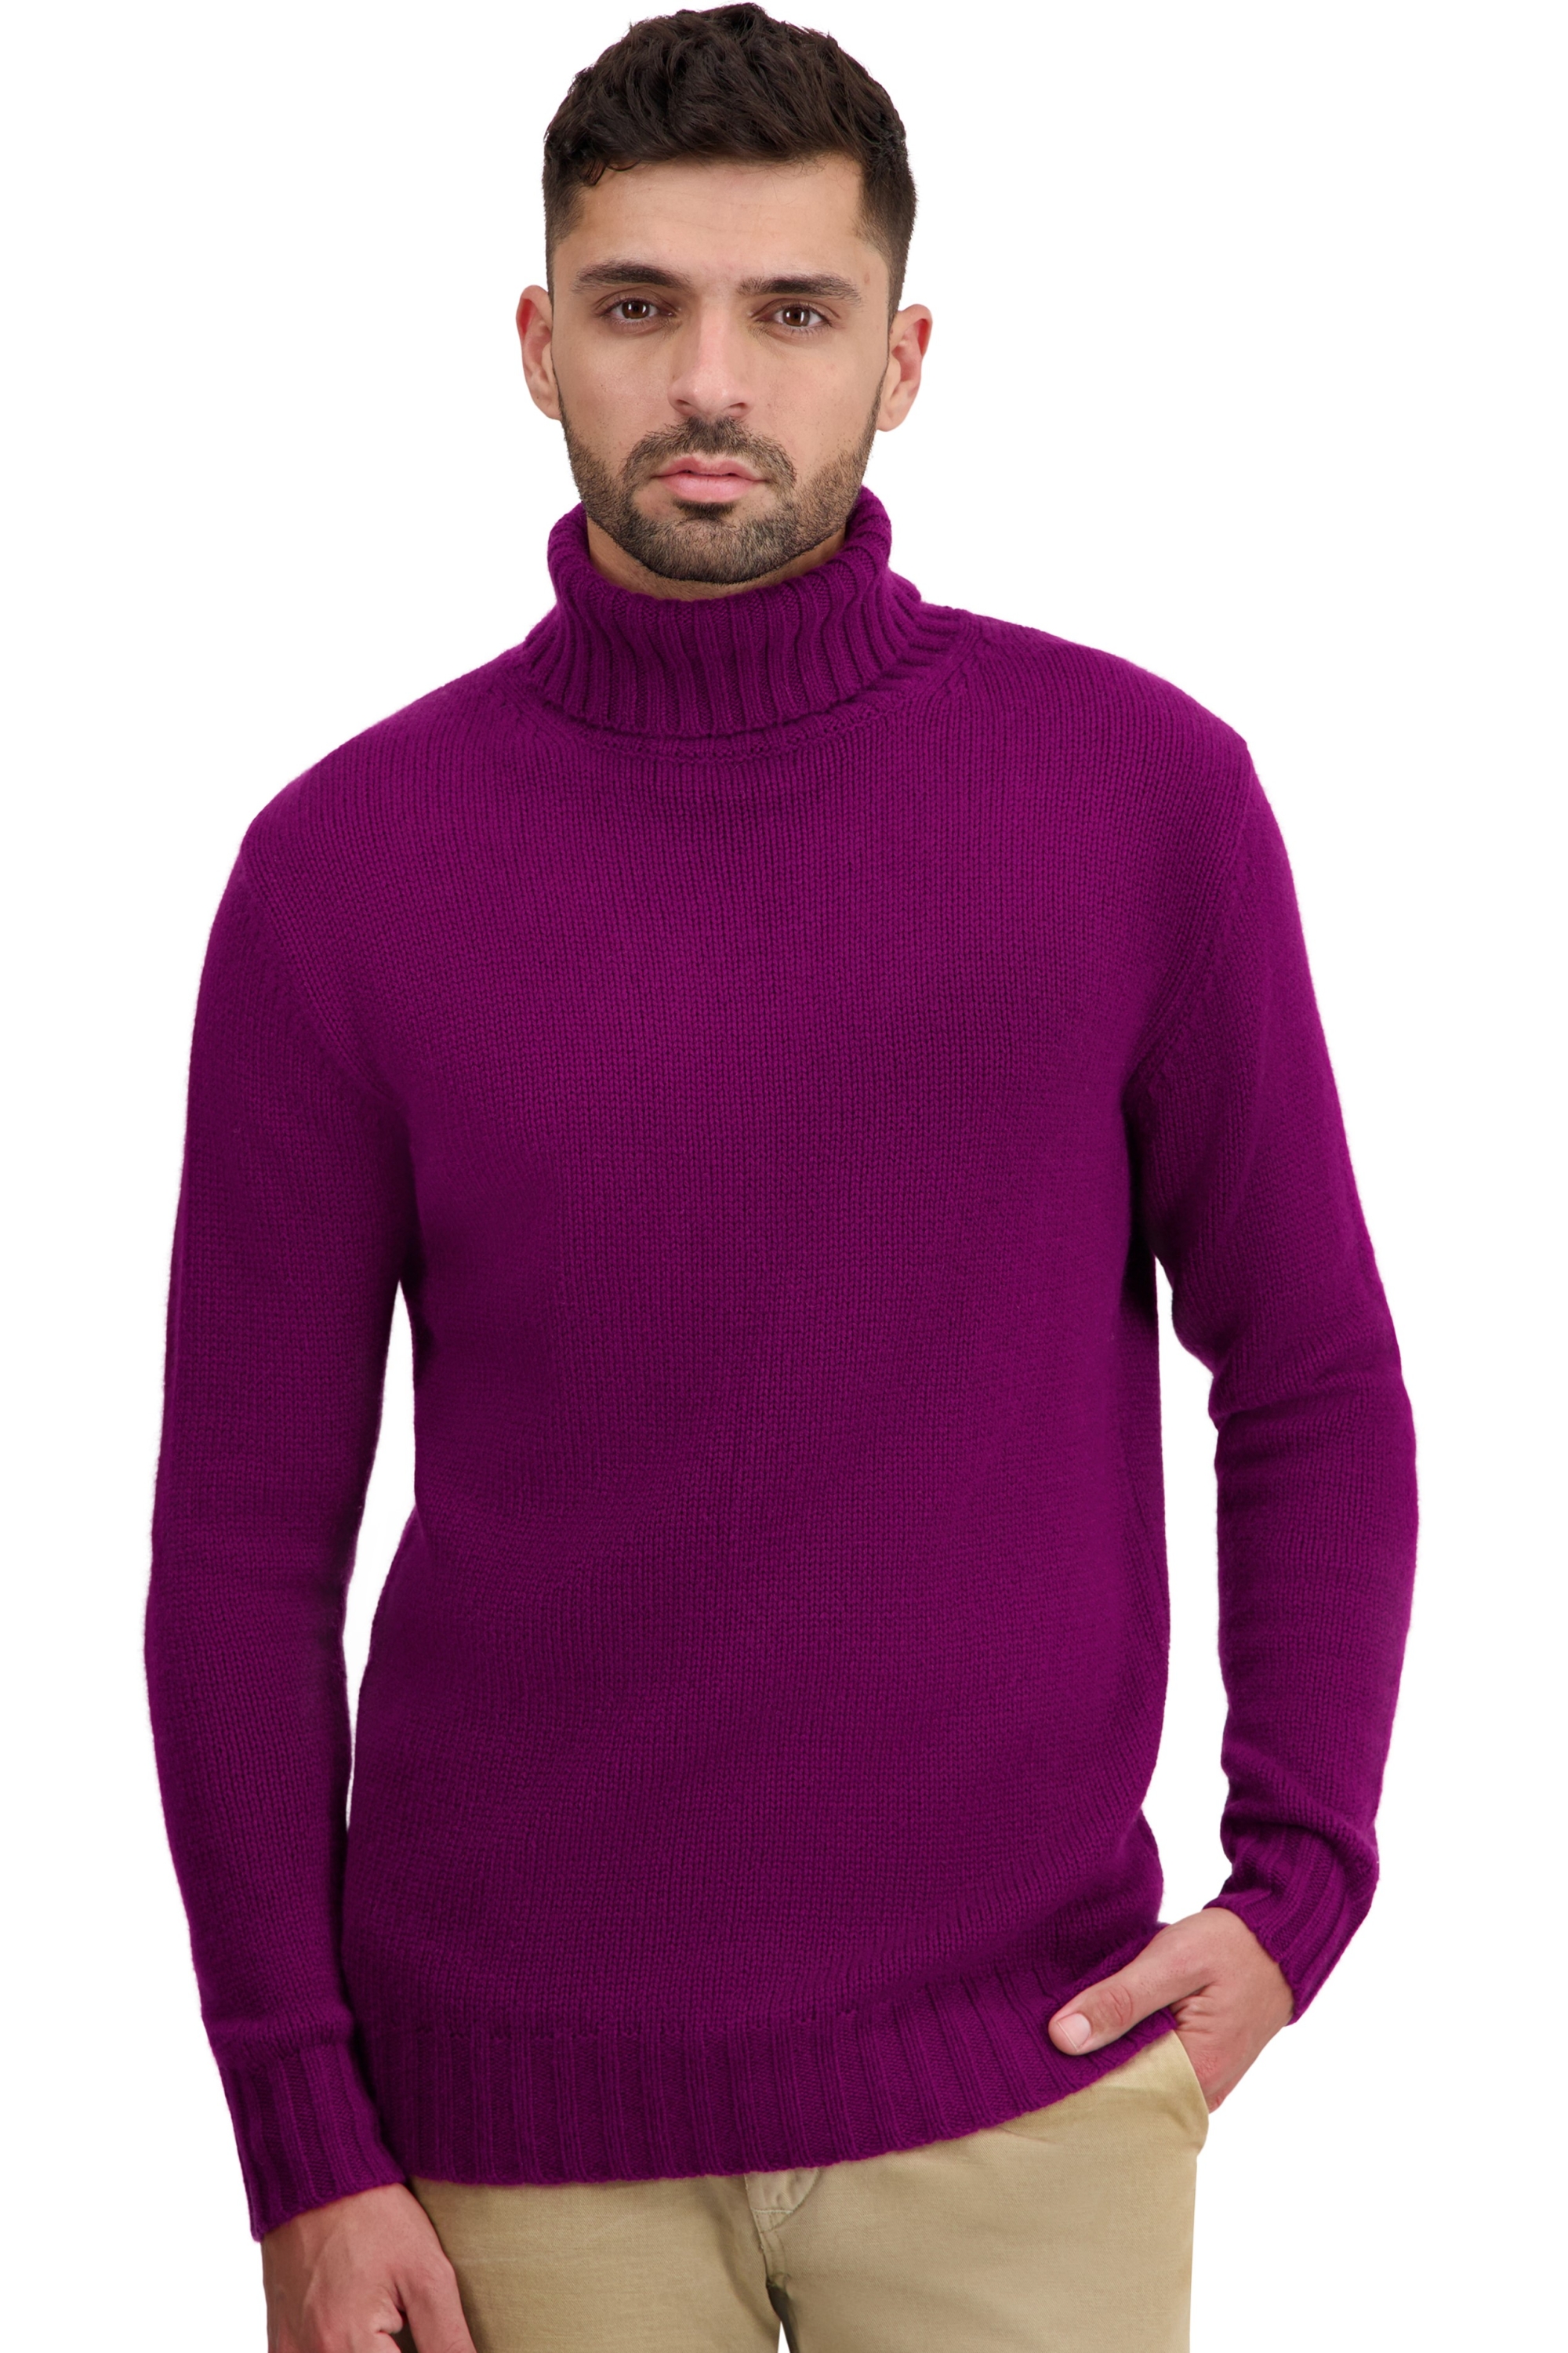 Cashmere men basic sweaters at low prices tobago first rich claret 2xl